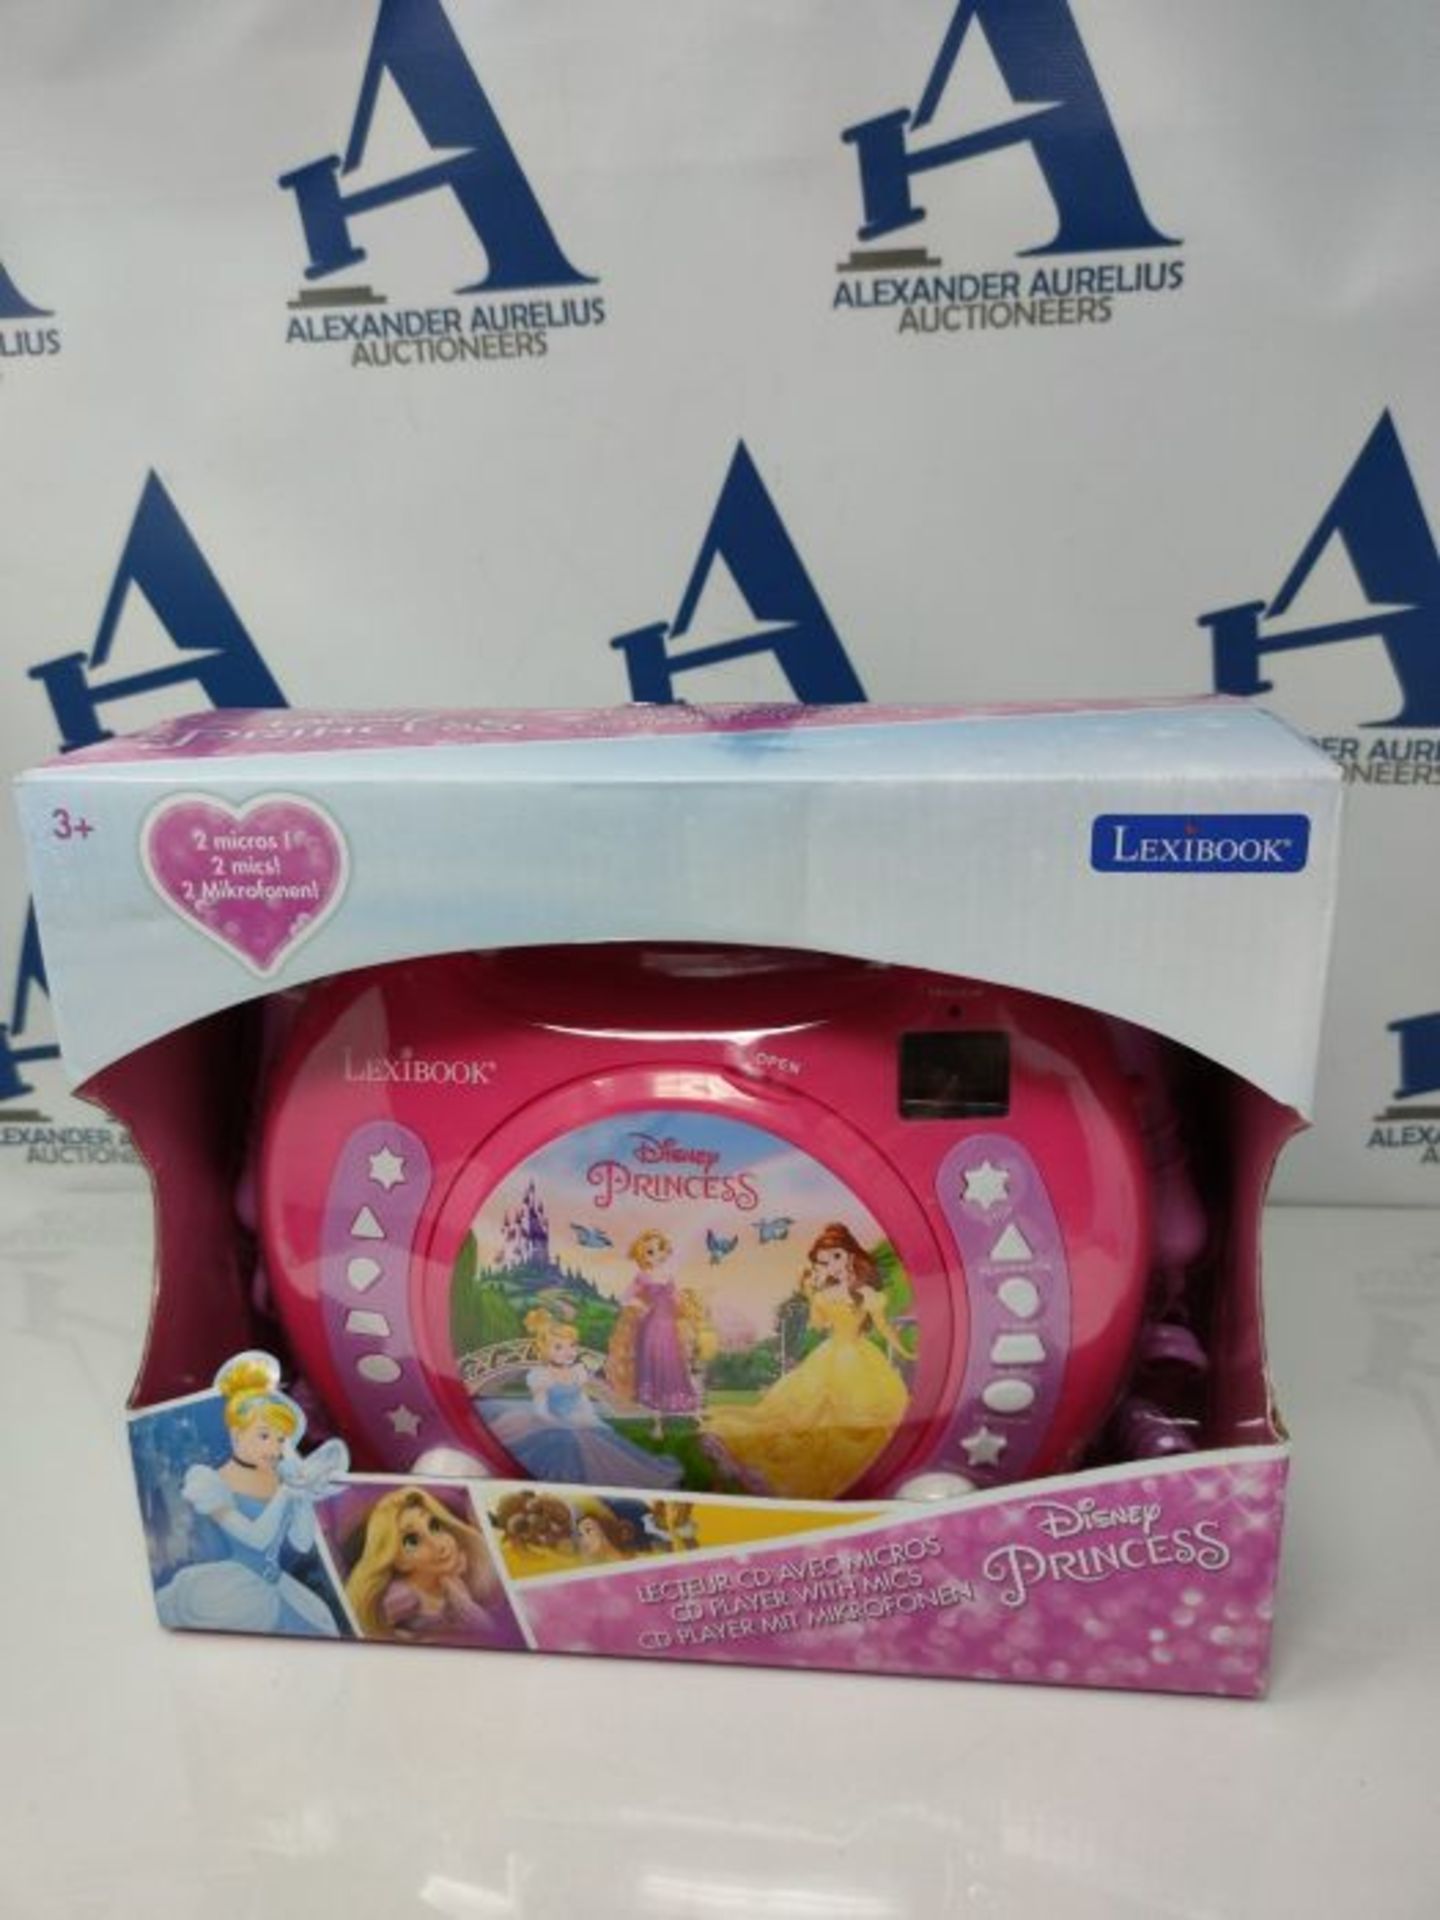 Lexibook Disney Princess Rapunzel CD player for kids with 2 toy microphones, headphone - Image 2 of 3